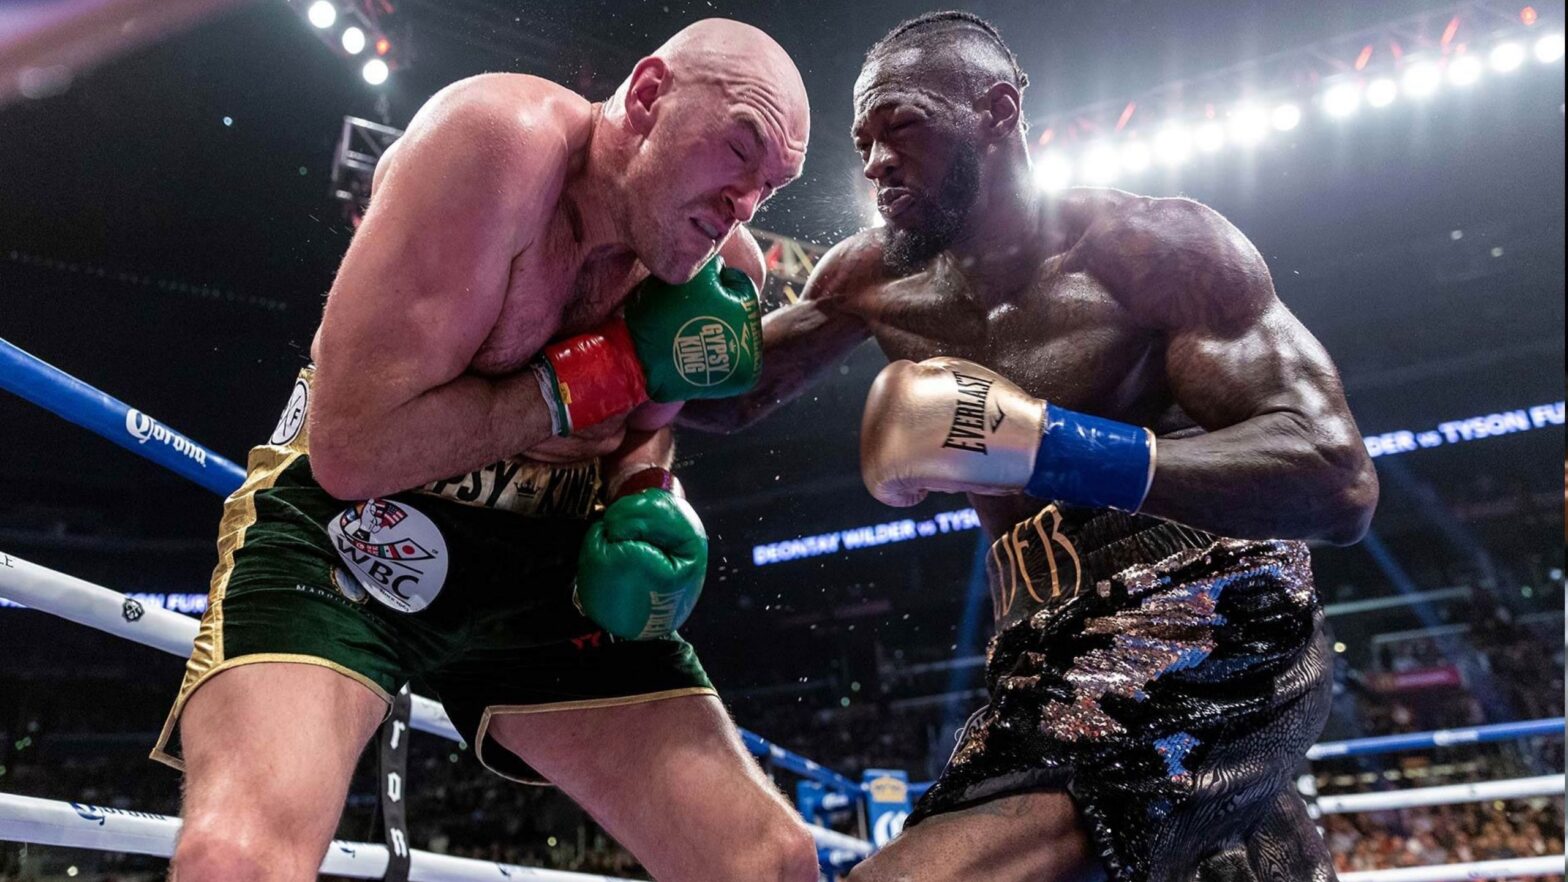 Tyson Fury vs Deontay Wilder 3 Purse, Payout And Prize Money: Know How Much Will The Boxers Make From The Triology Fight